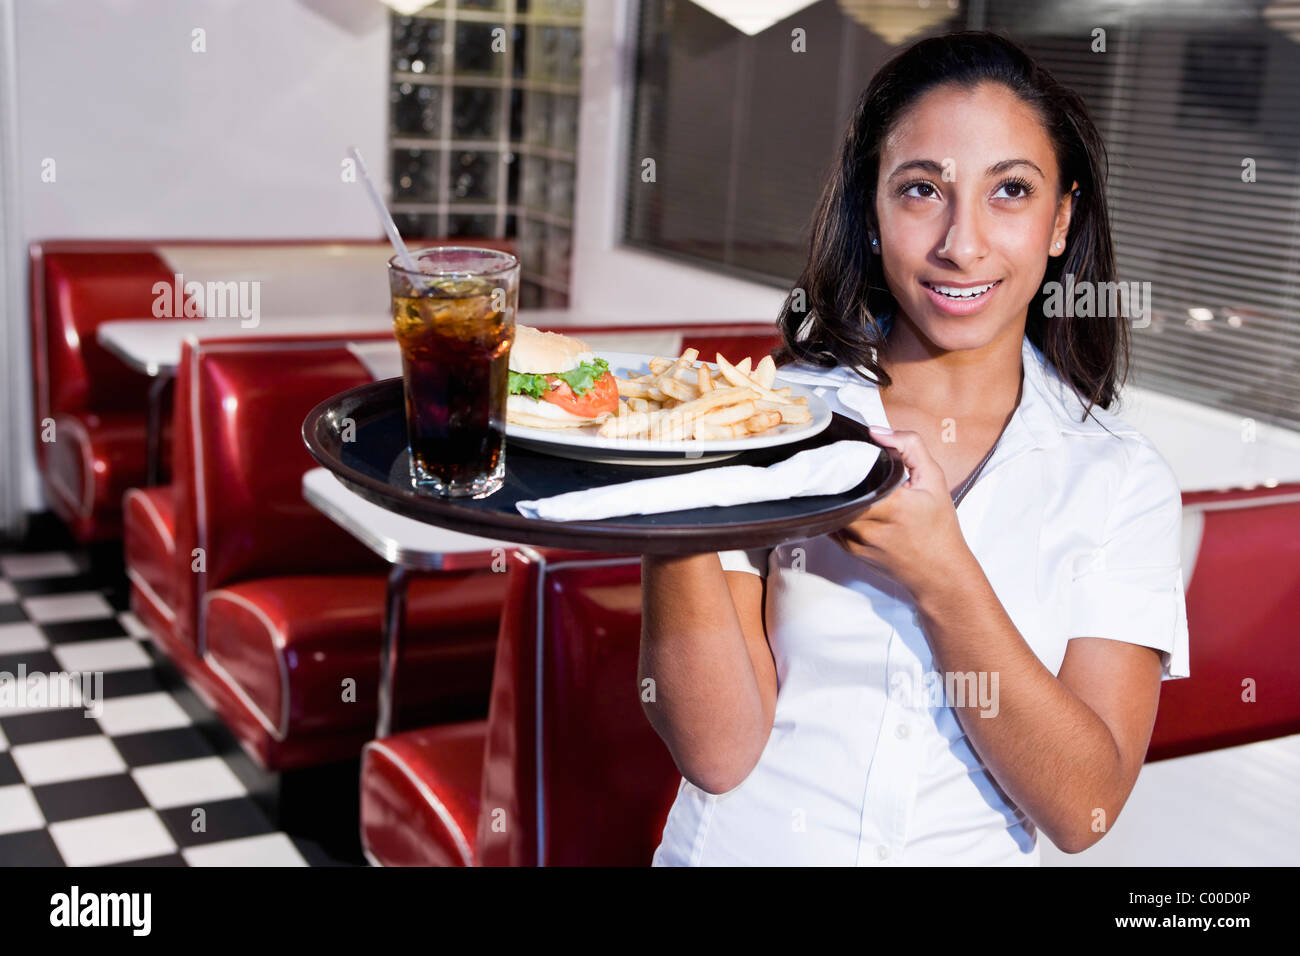 African American waitress serving lunch in diner Stock Photo